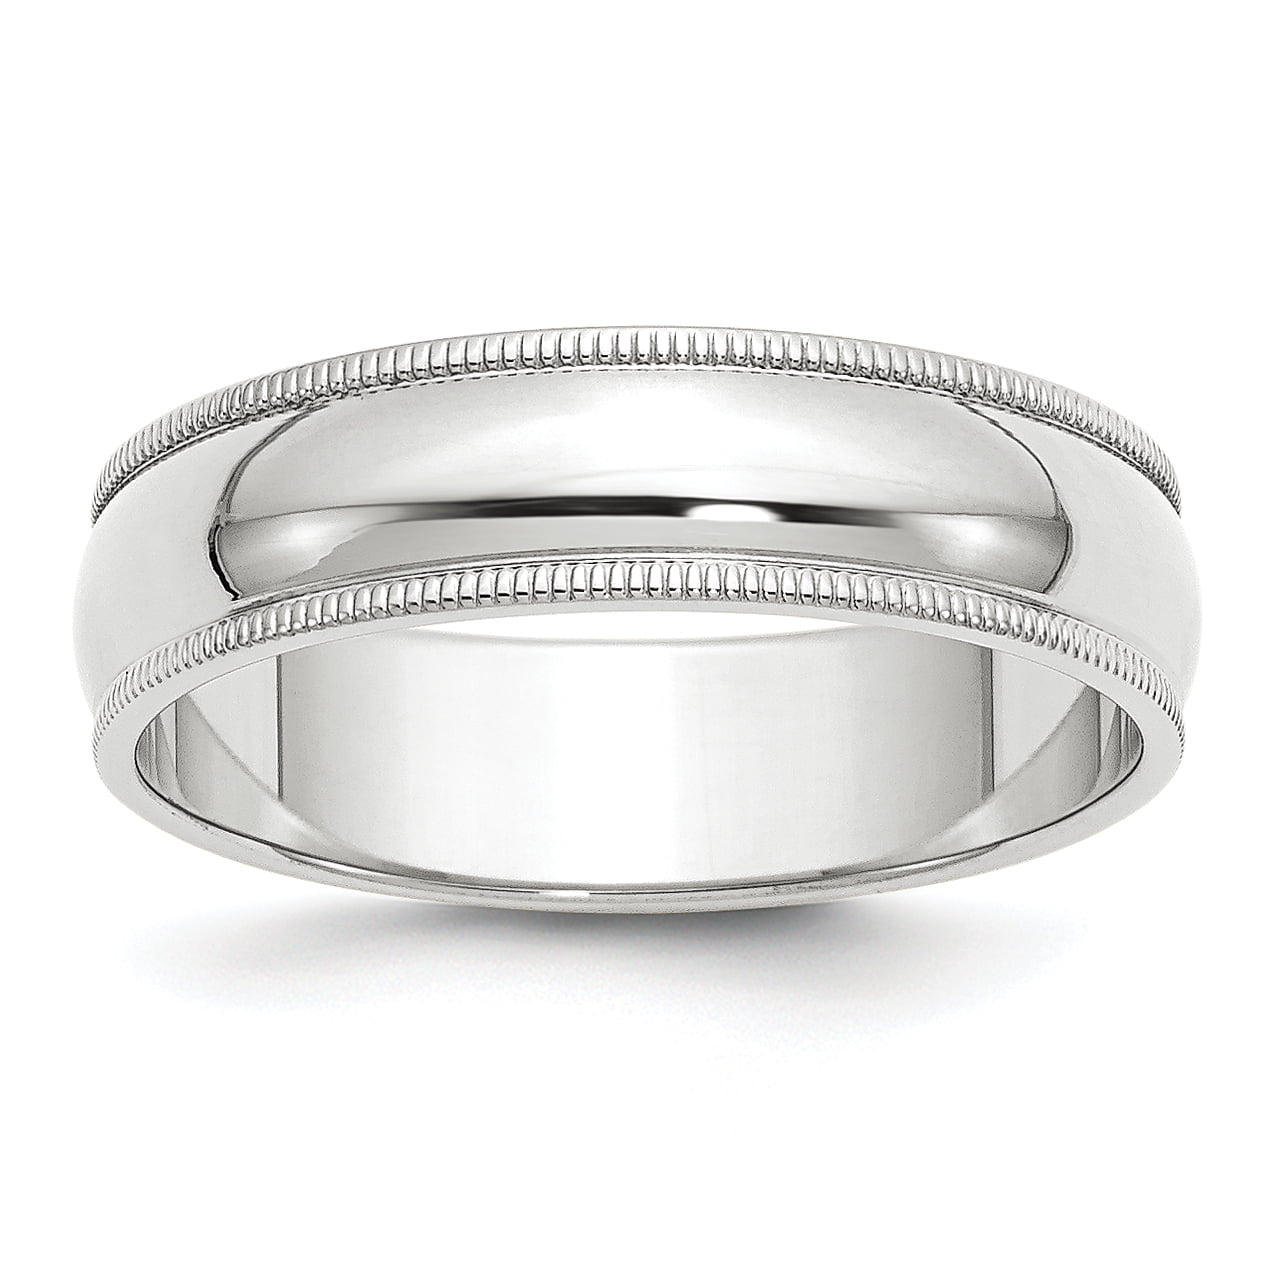 Gold Band Rings For Wedding – Ioka Jewelry | 14k Size White Gold